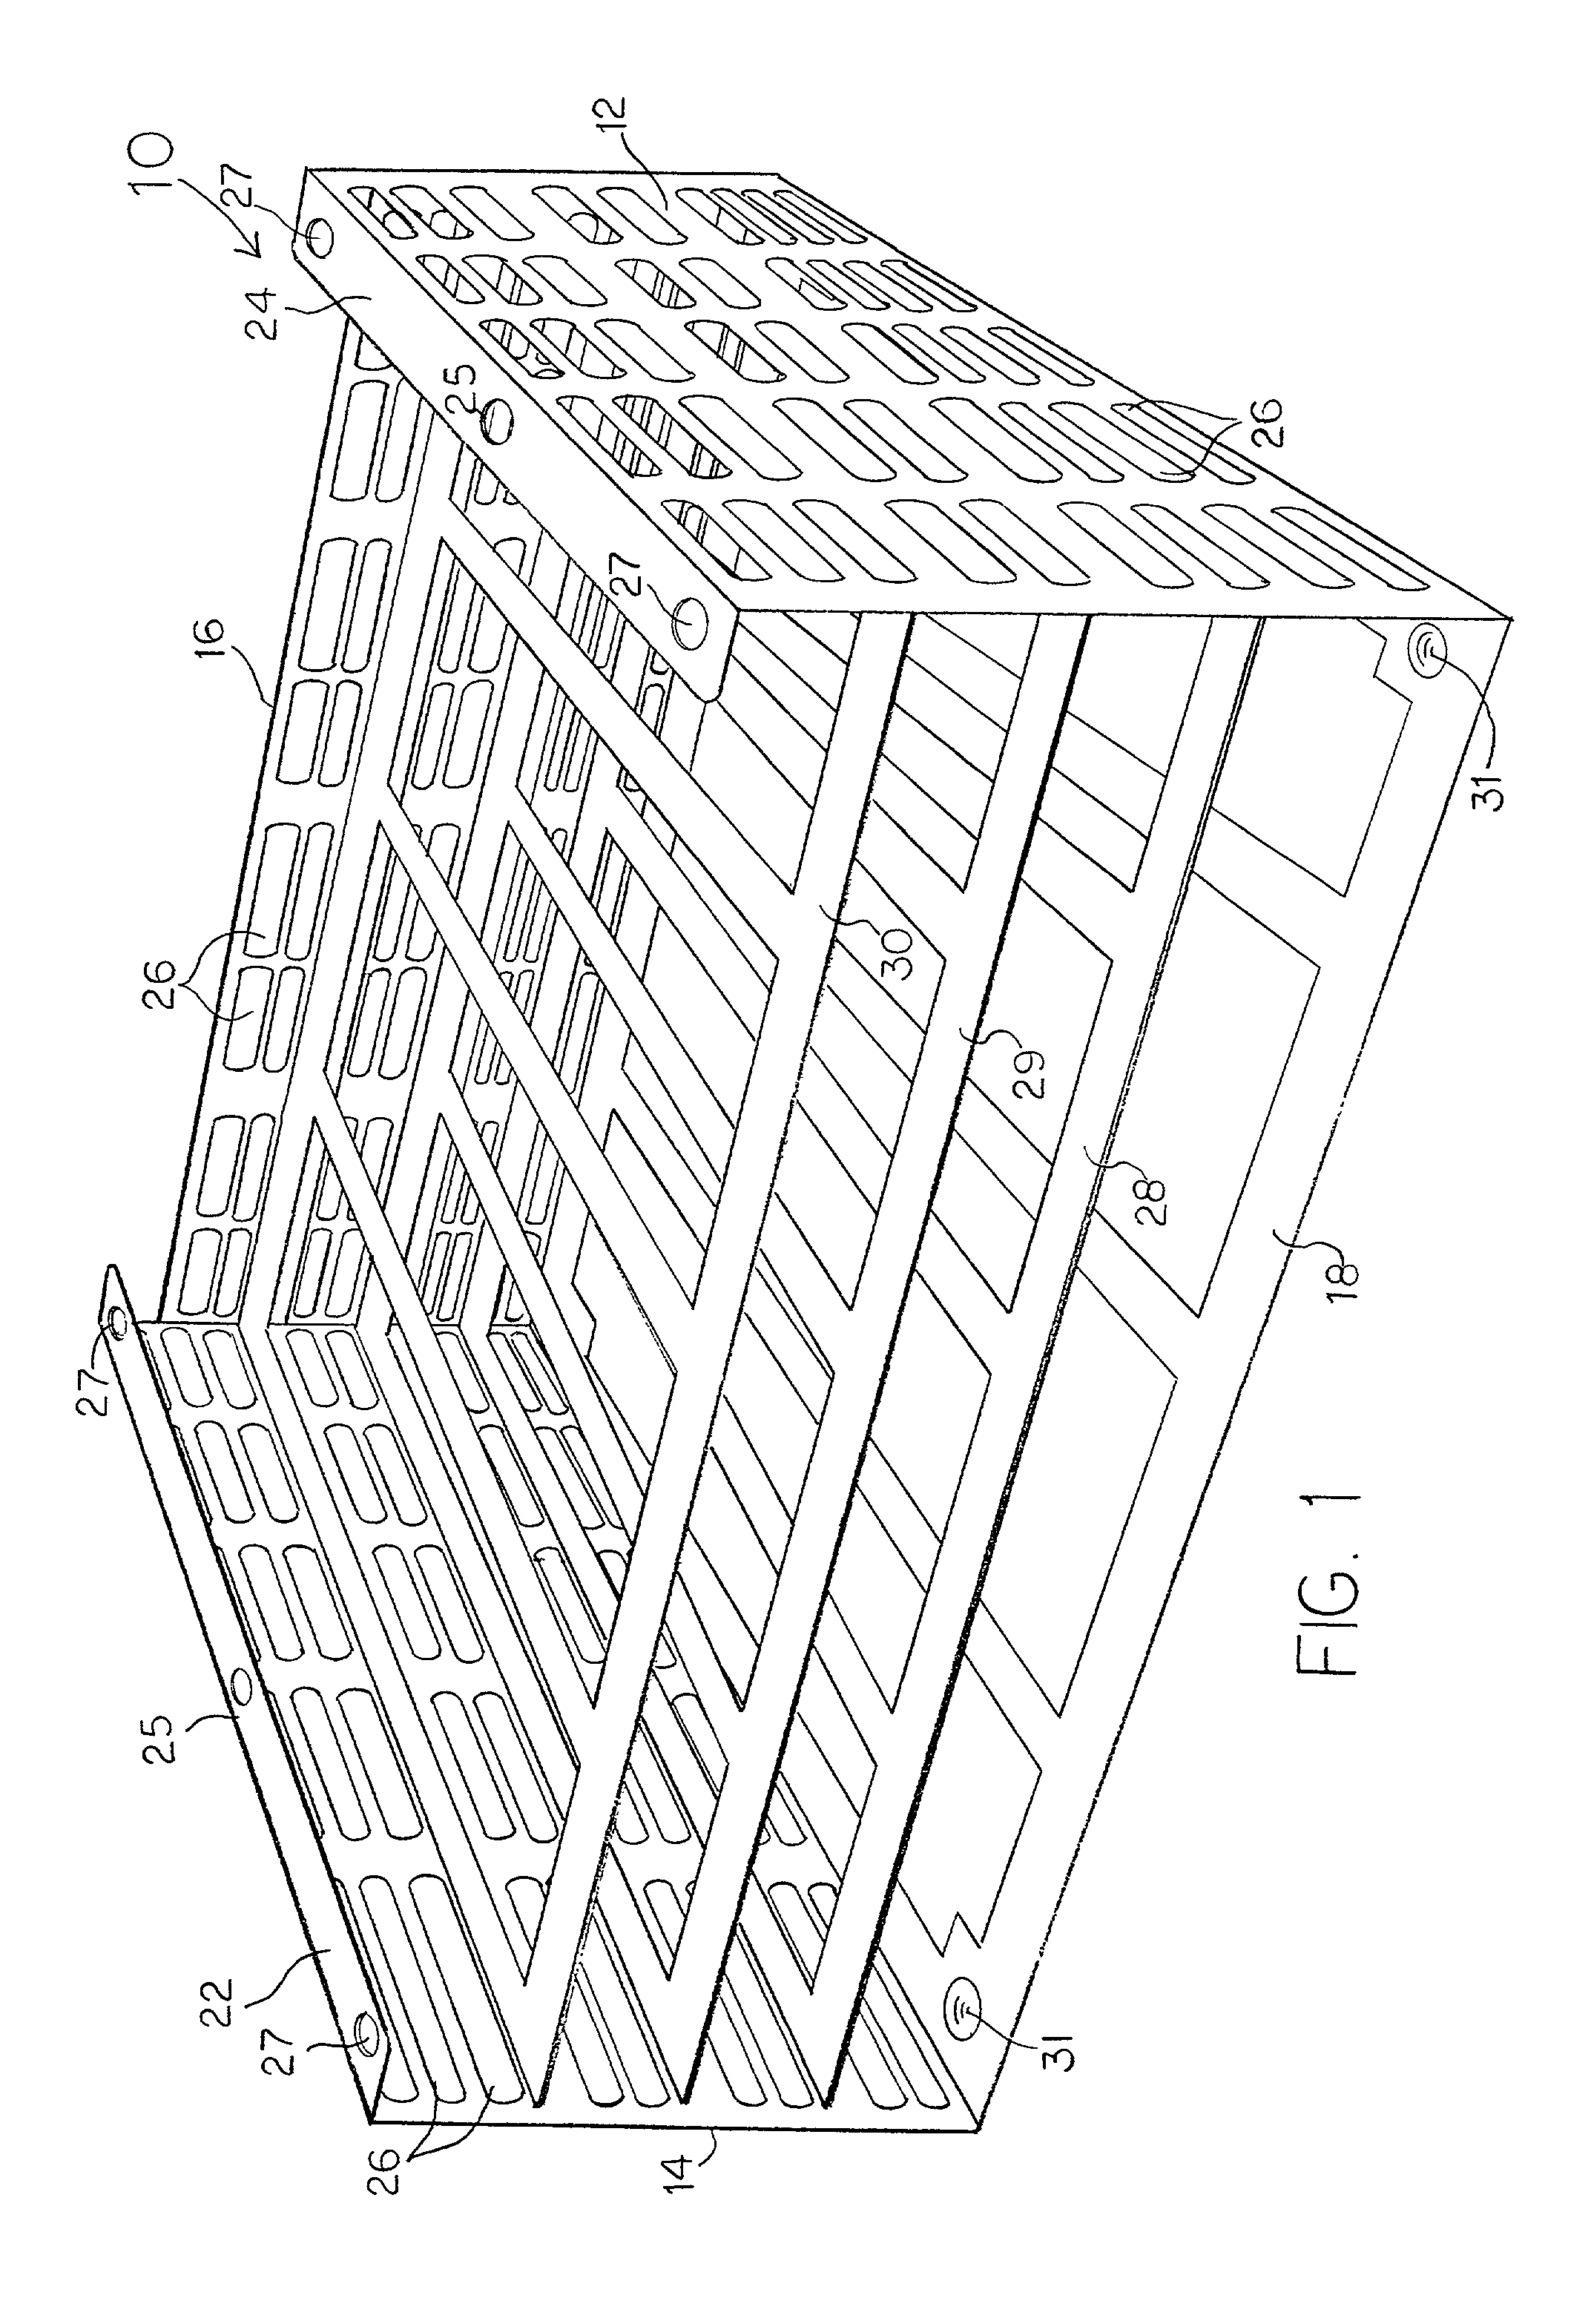 Sterilization apparatus for orthodontic bands